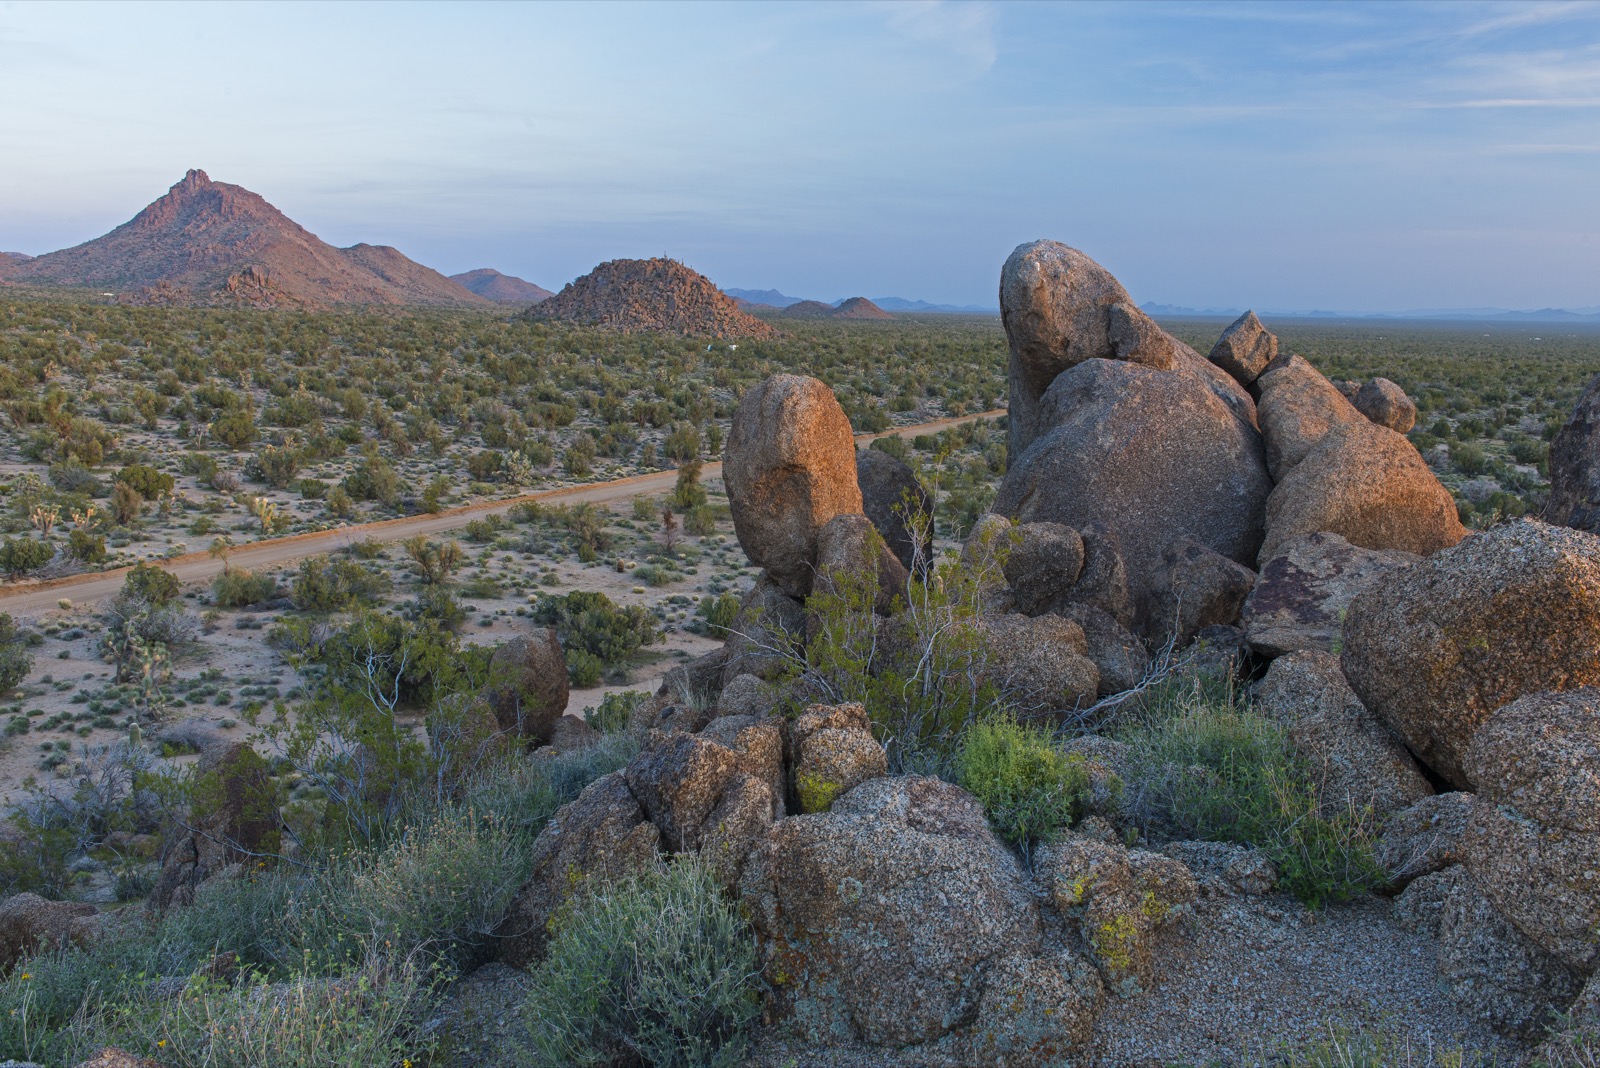 Sunlight setting on rocks in Stagecoach Trails